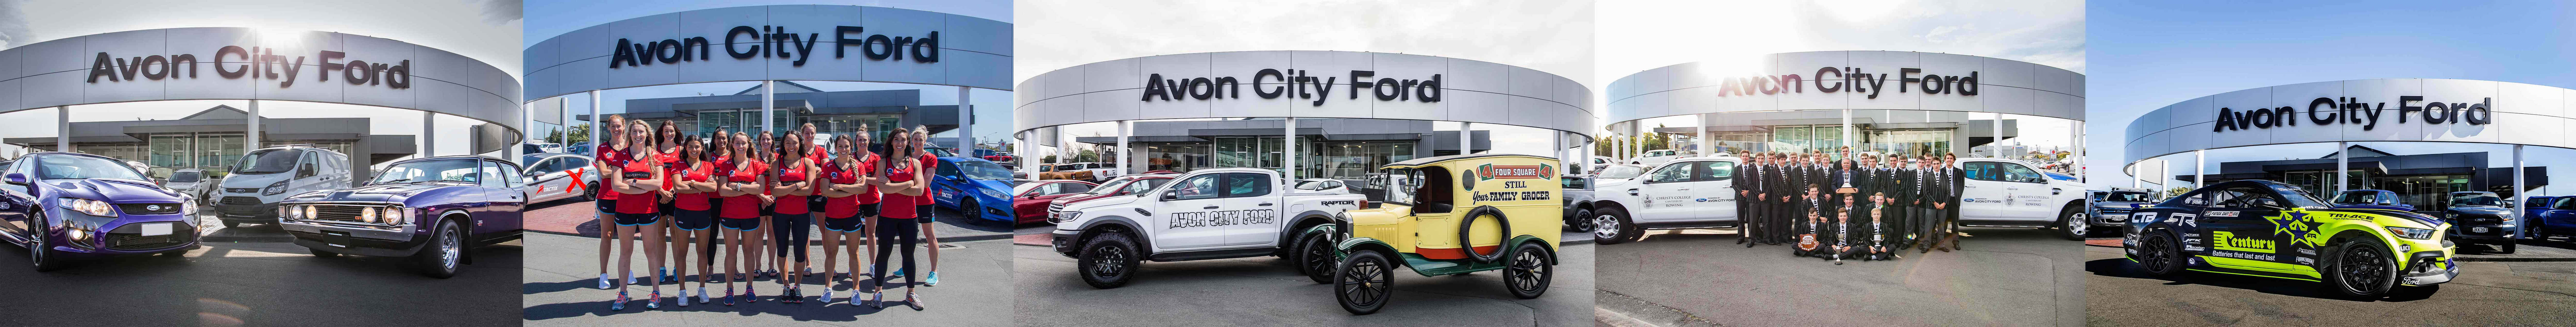 Avon City Ford events